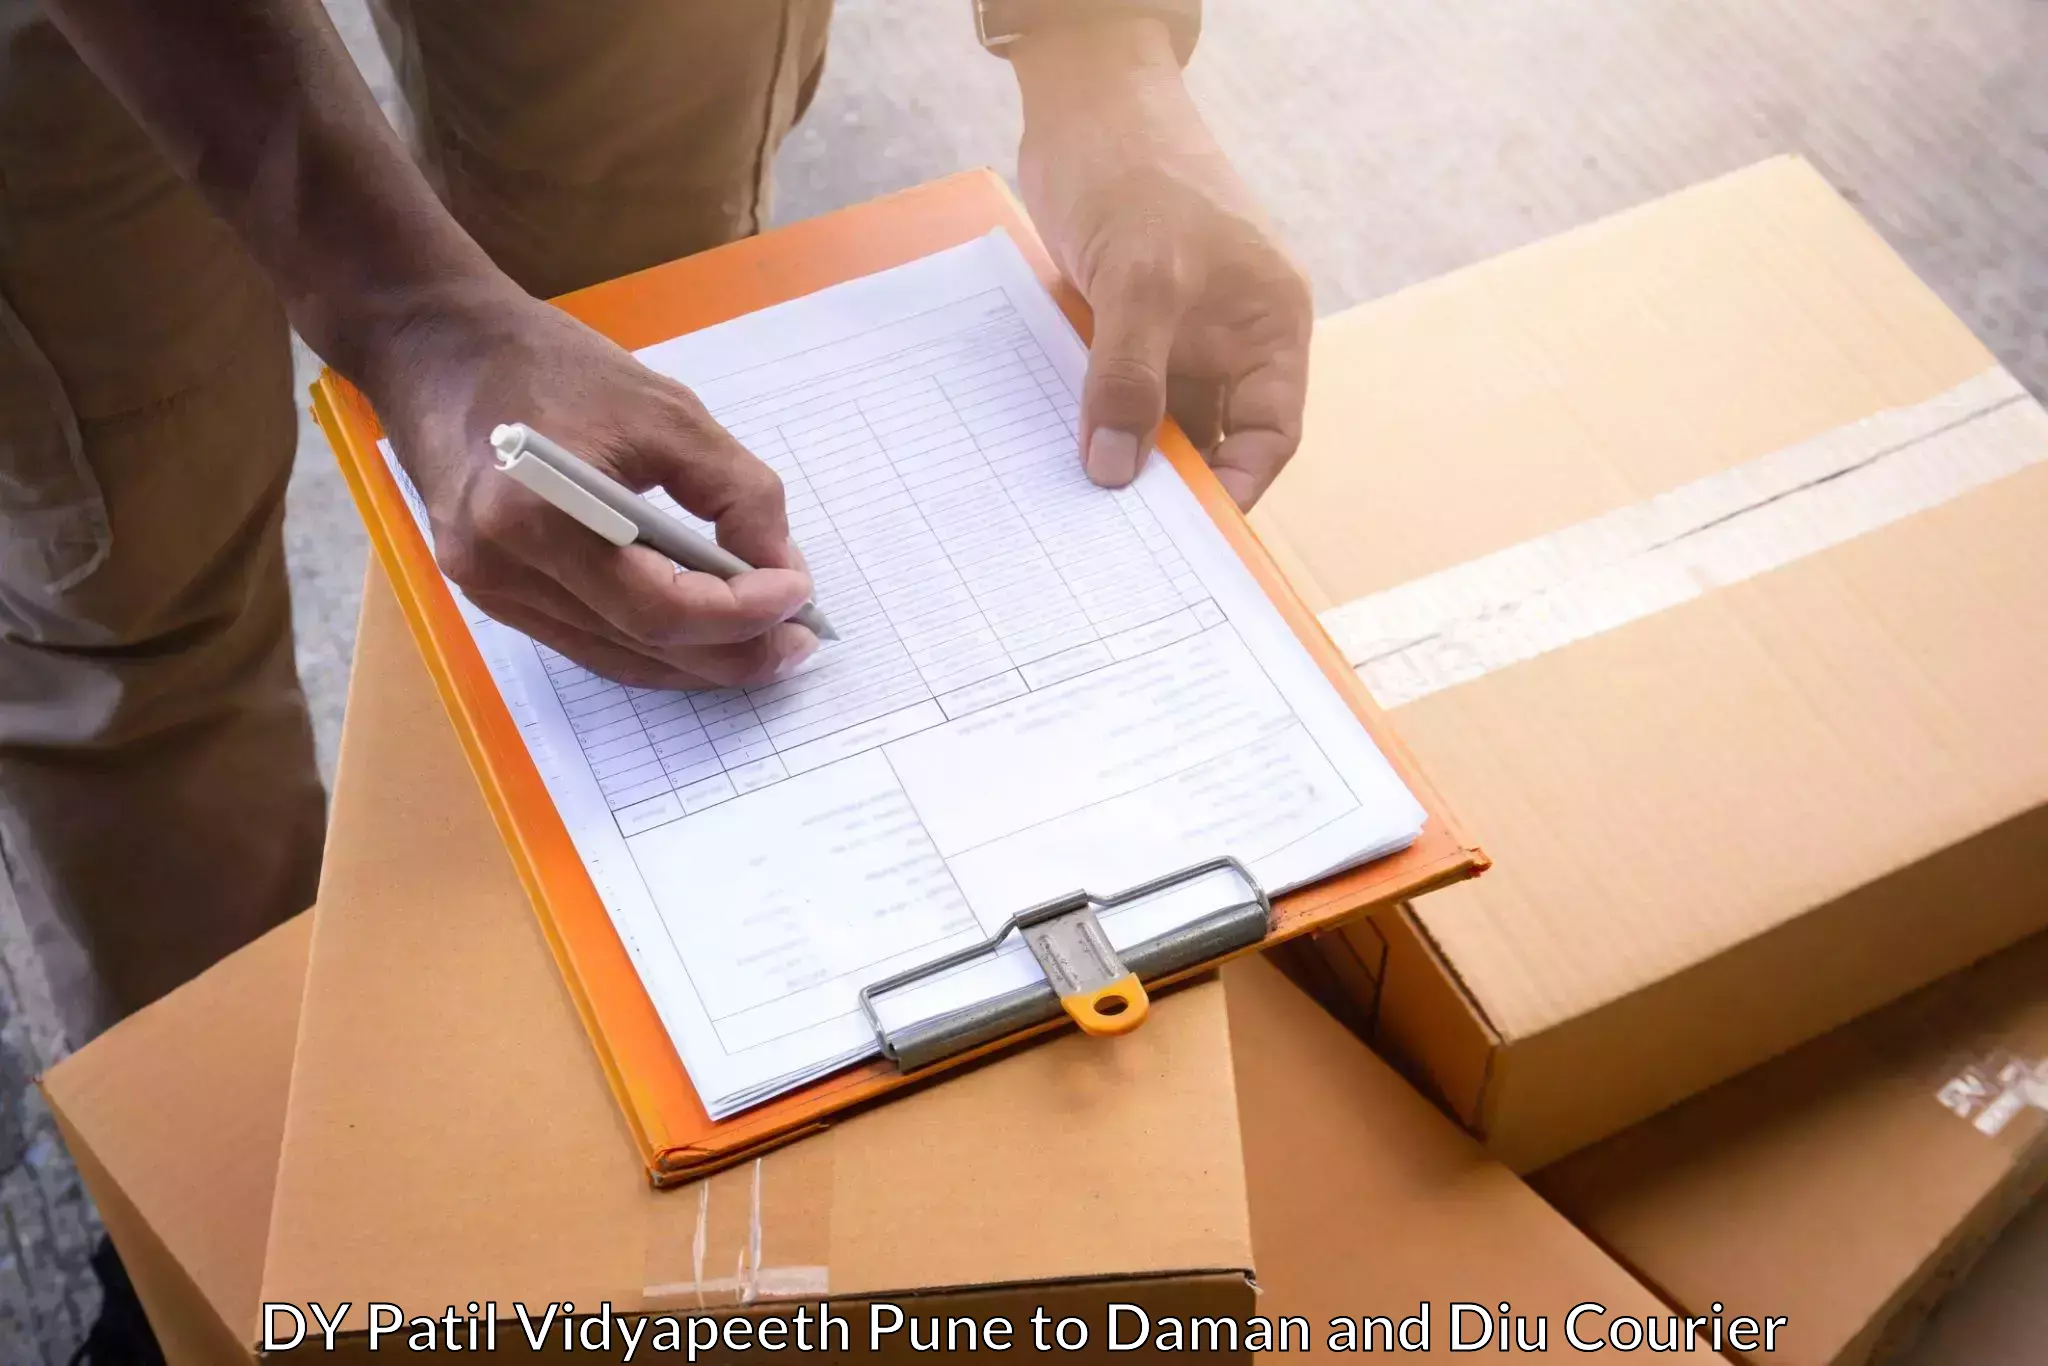 Seamless shipping experience in DY Patil Vidyapeeth Pune to Diu